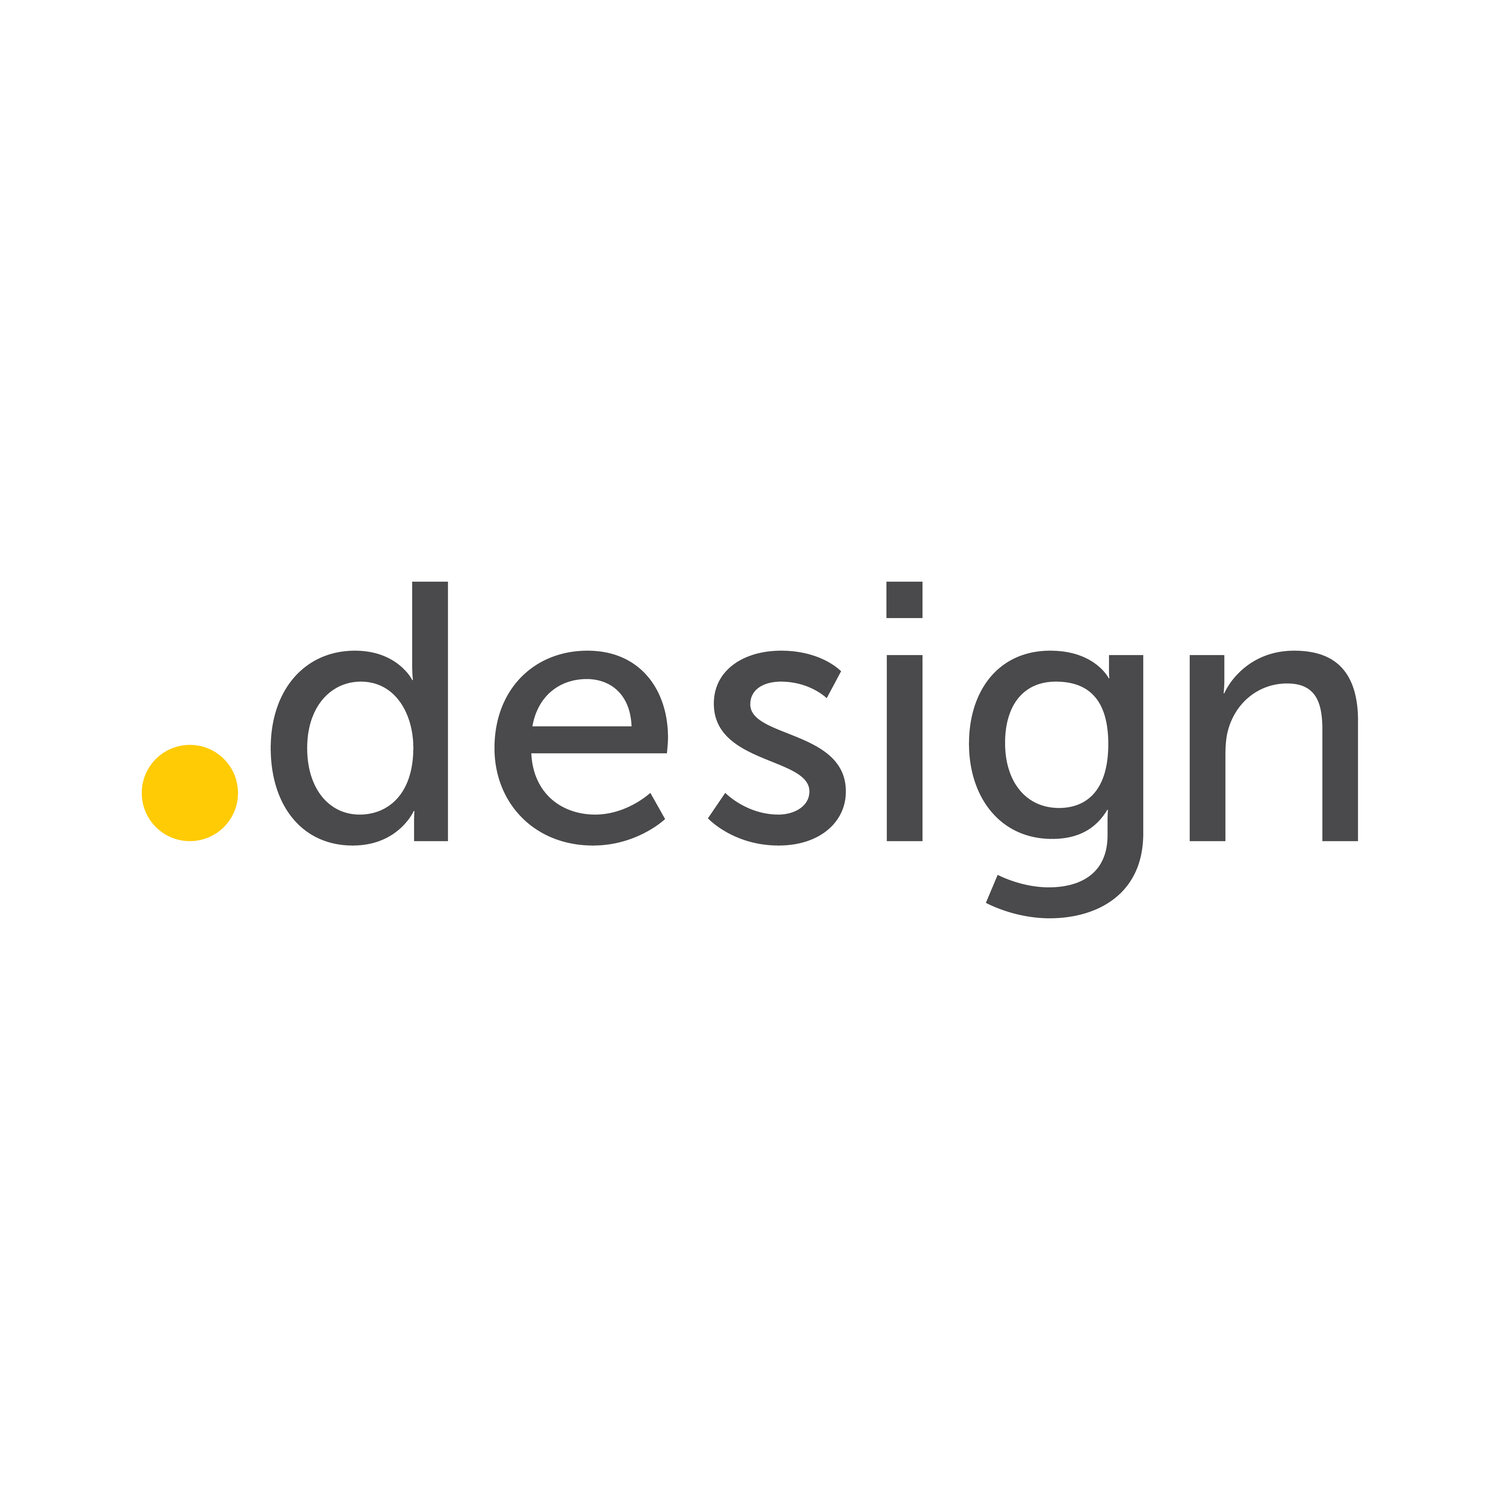 We at Top Level Design are excited to announce that we’ve reached a deal to transfer the rights of the .design top-level domain to GoDaddy Registry.